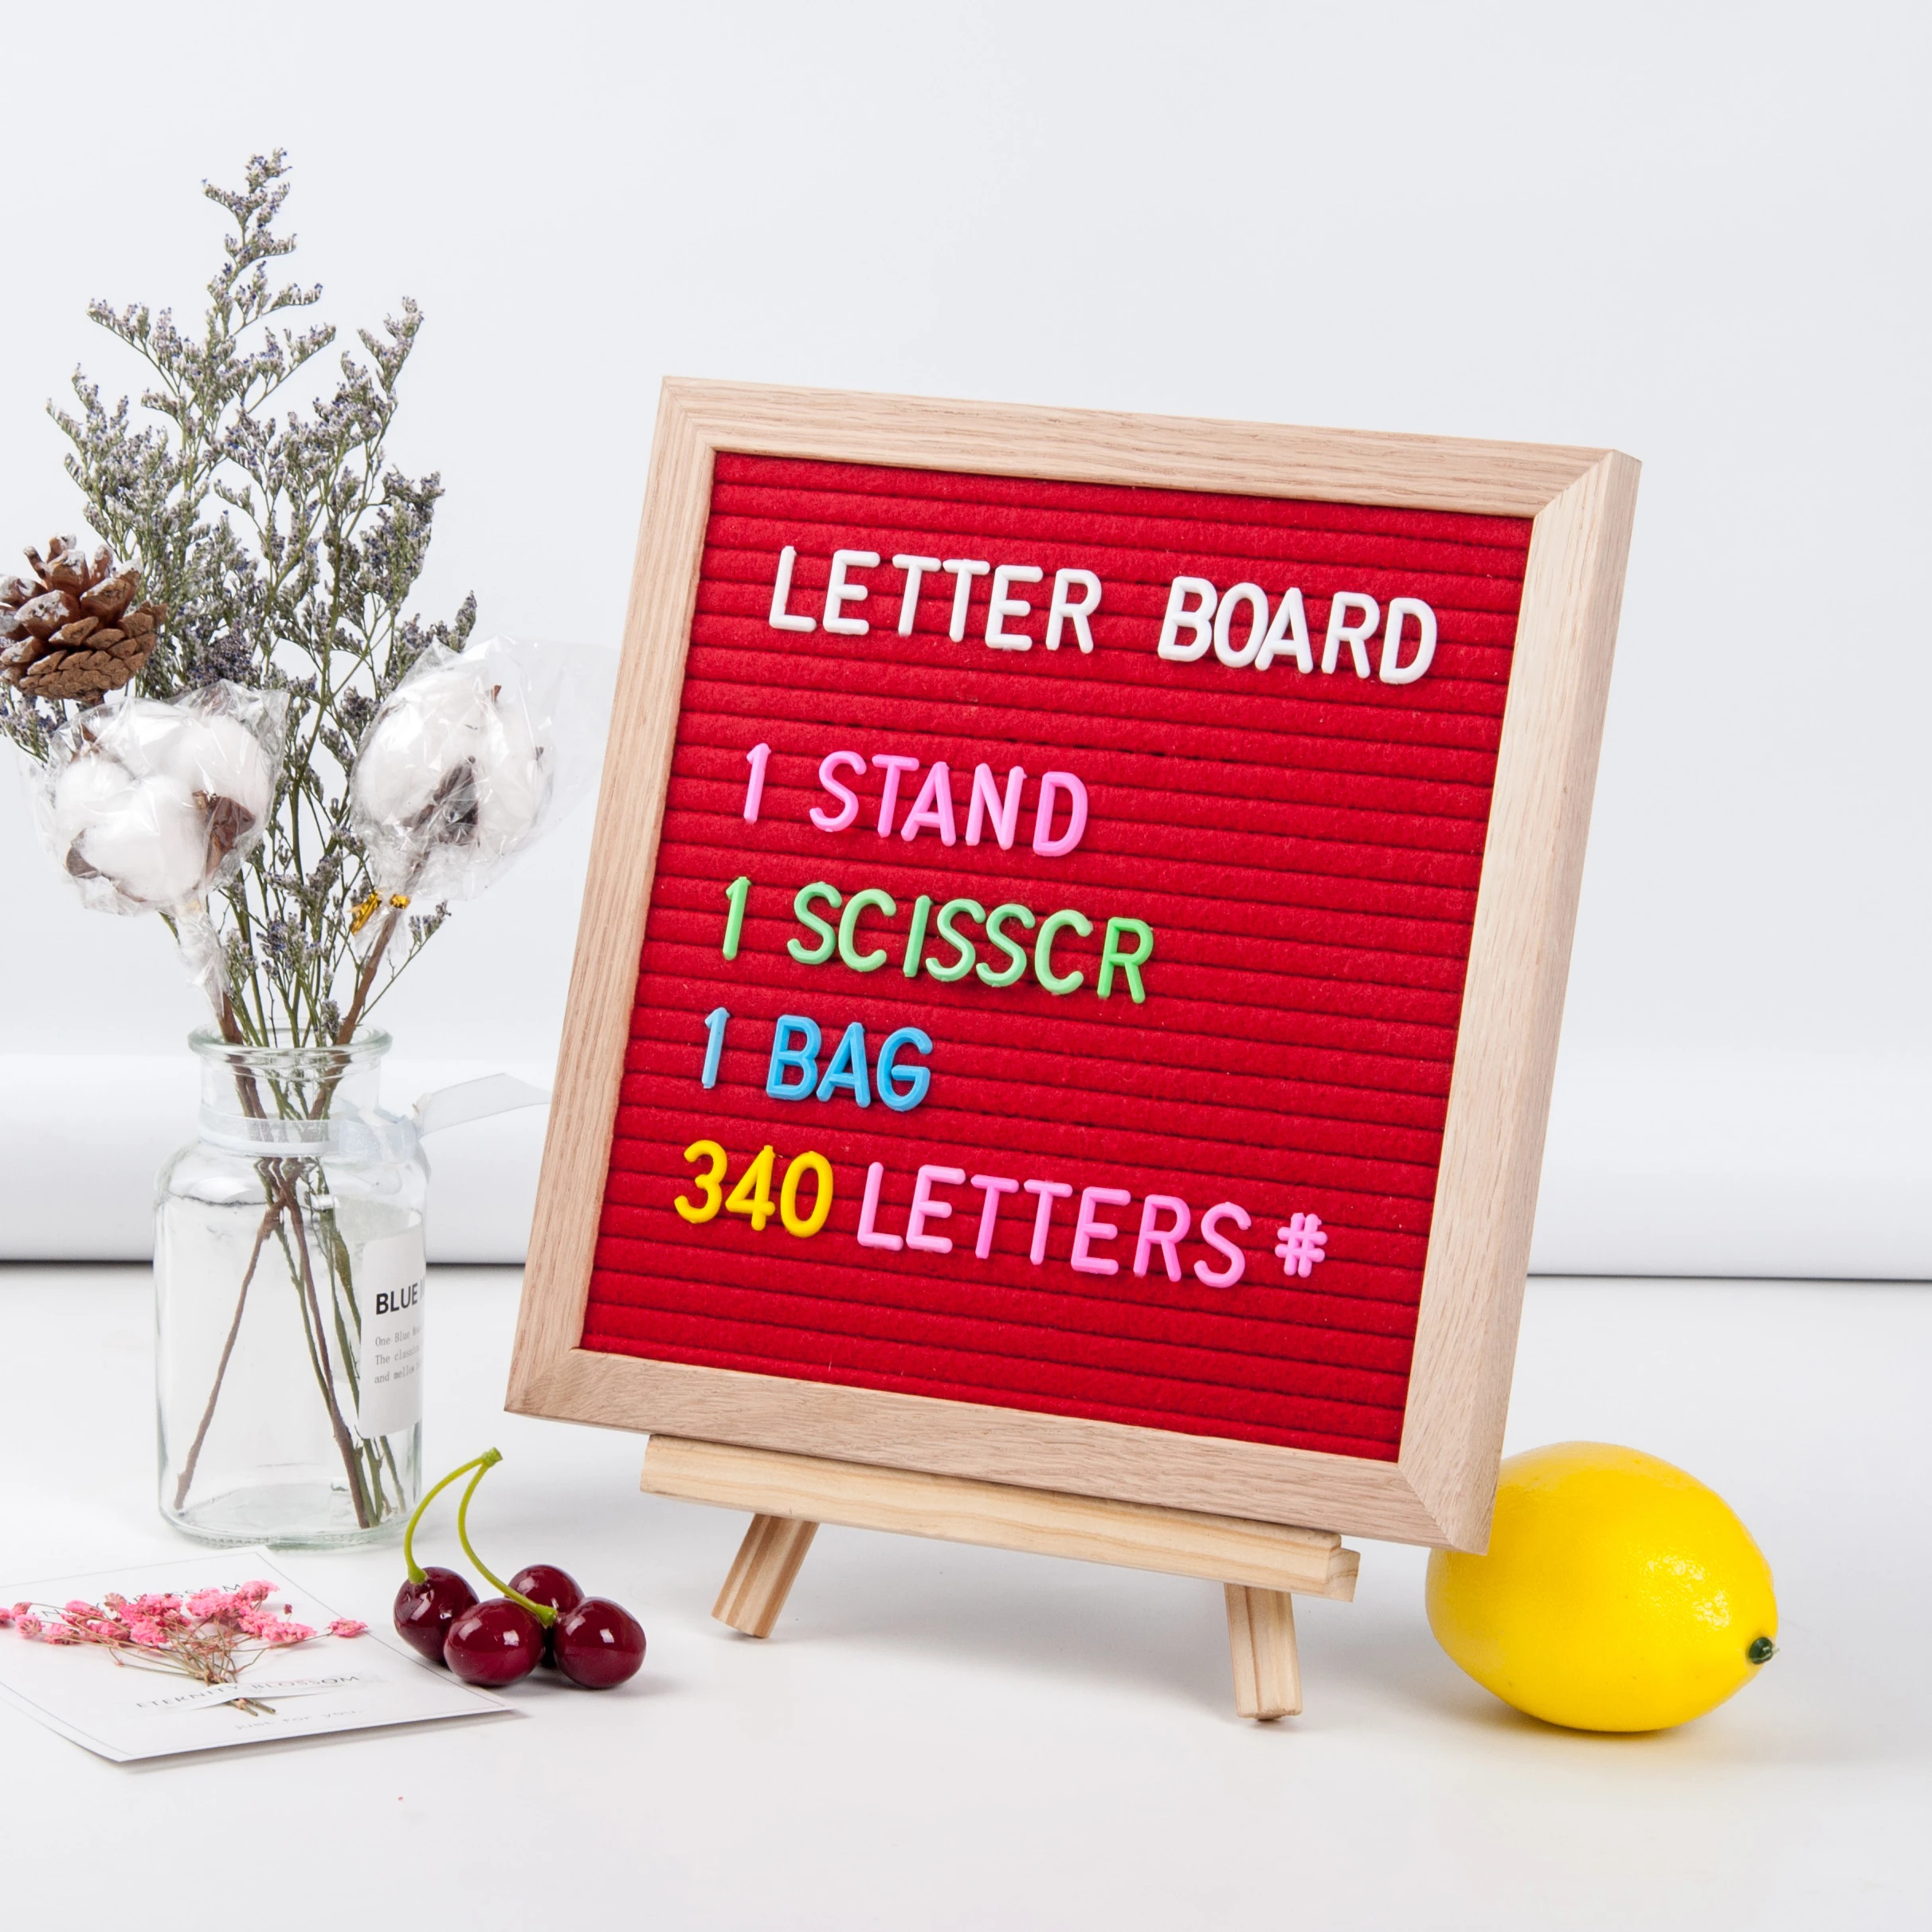 wholesale mini size 10x10 inches oak frame changeable Black Felt Letter Board with 340 pcs plastic Letters characters & stand